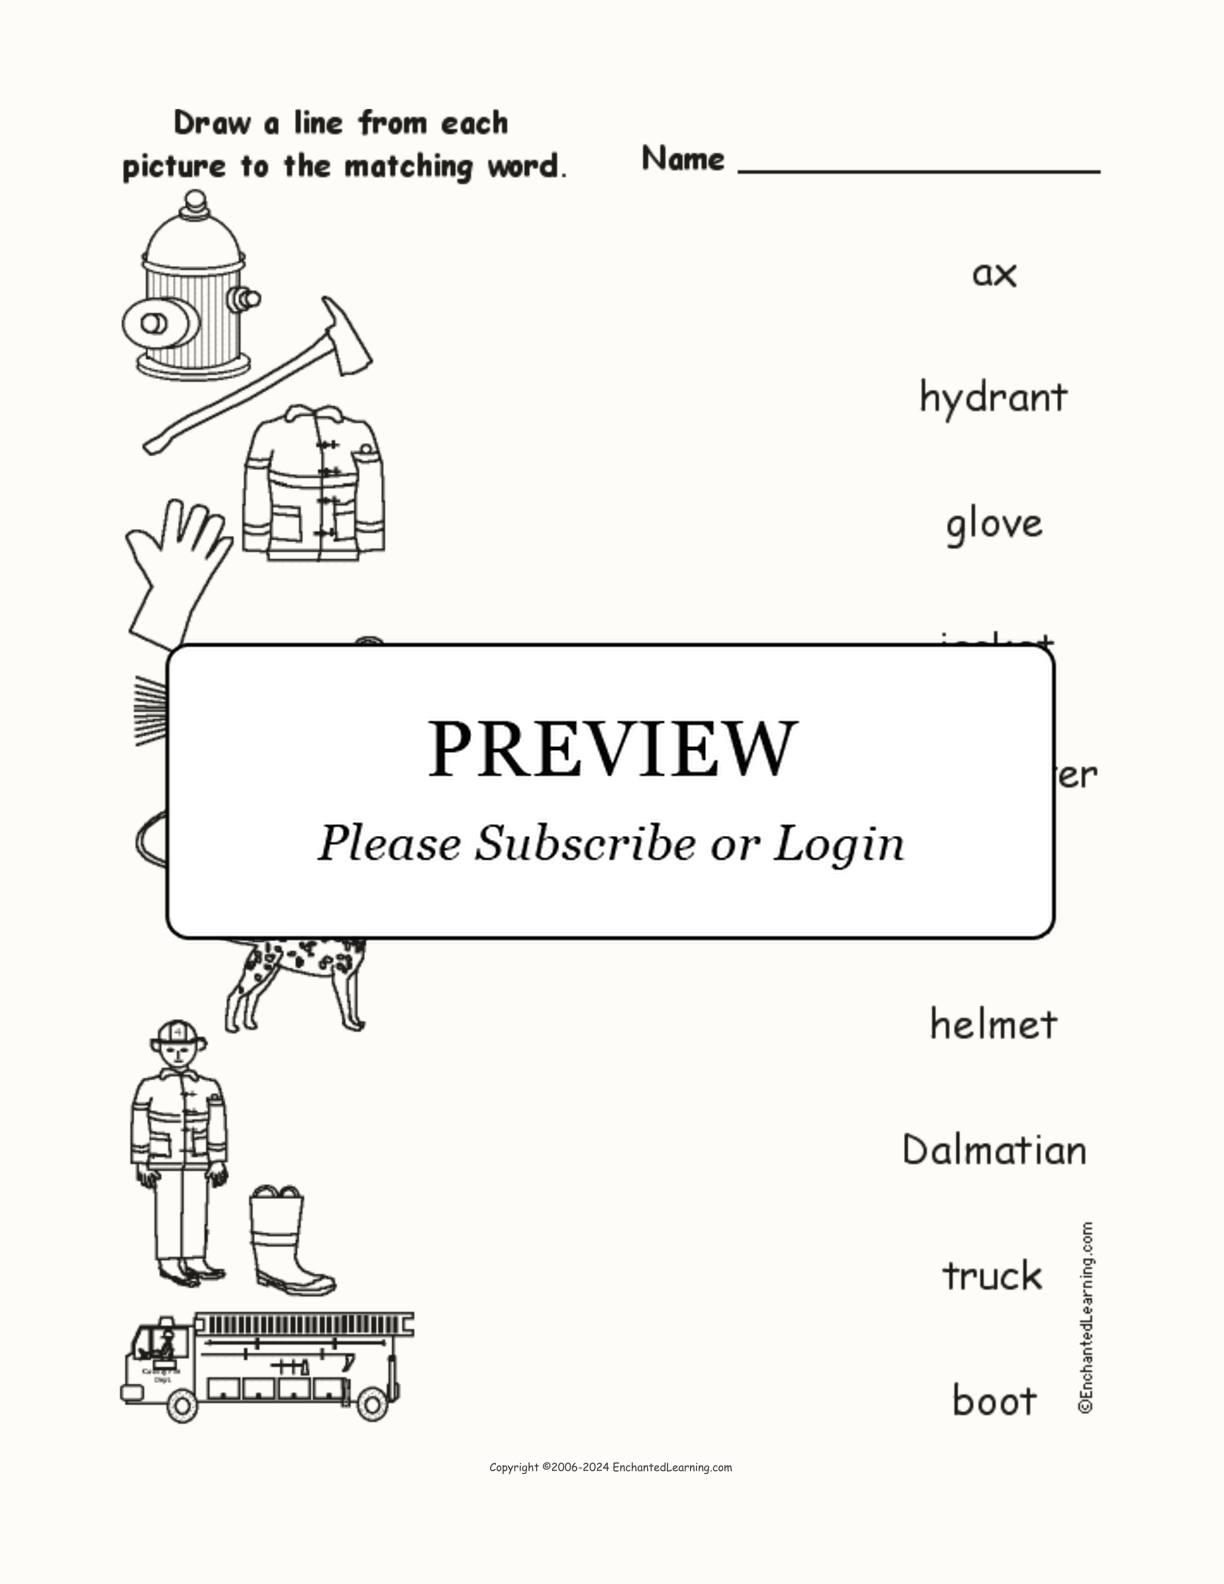 Firefighting Words - Match the Words to the Pictures interactive worksheet page 1